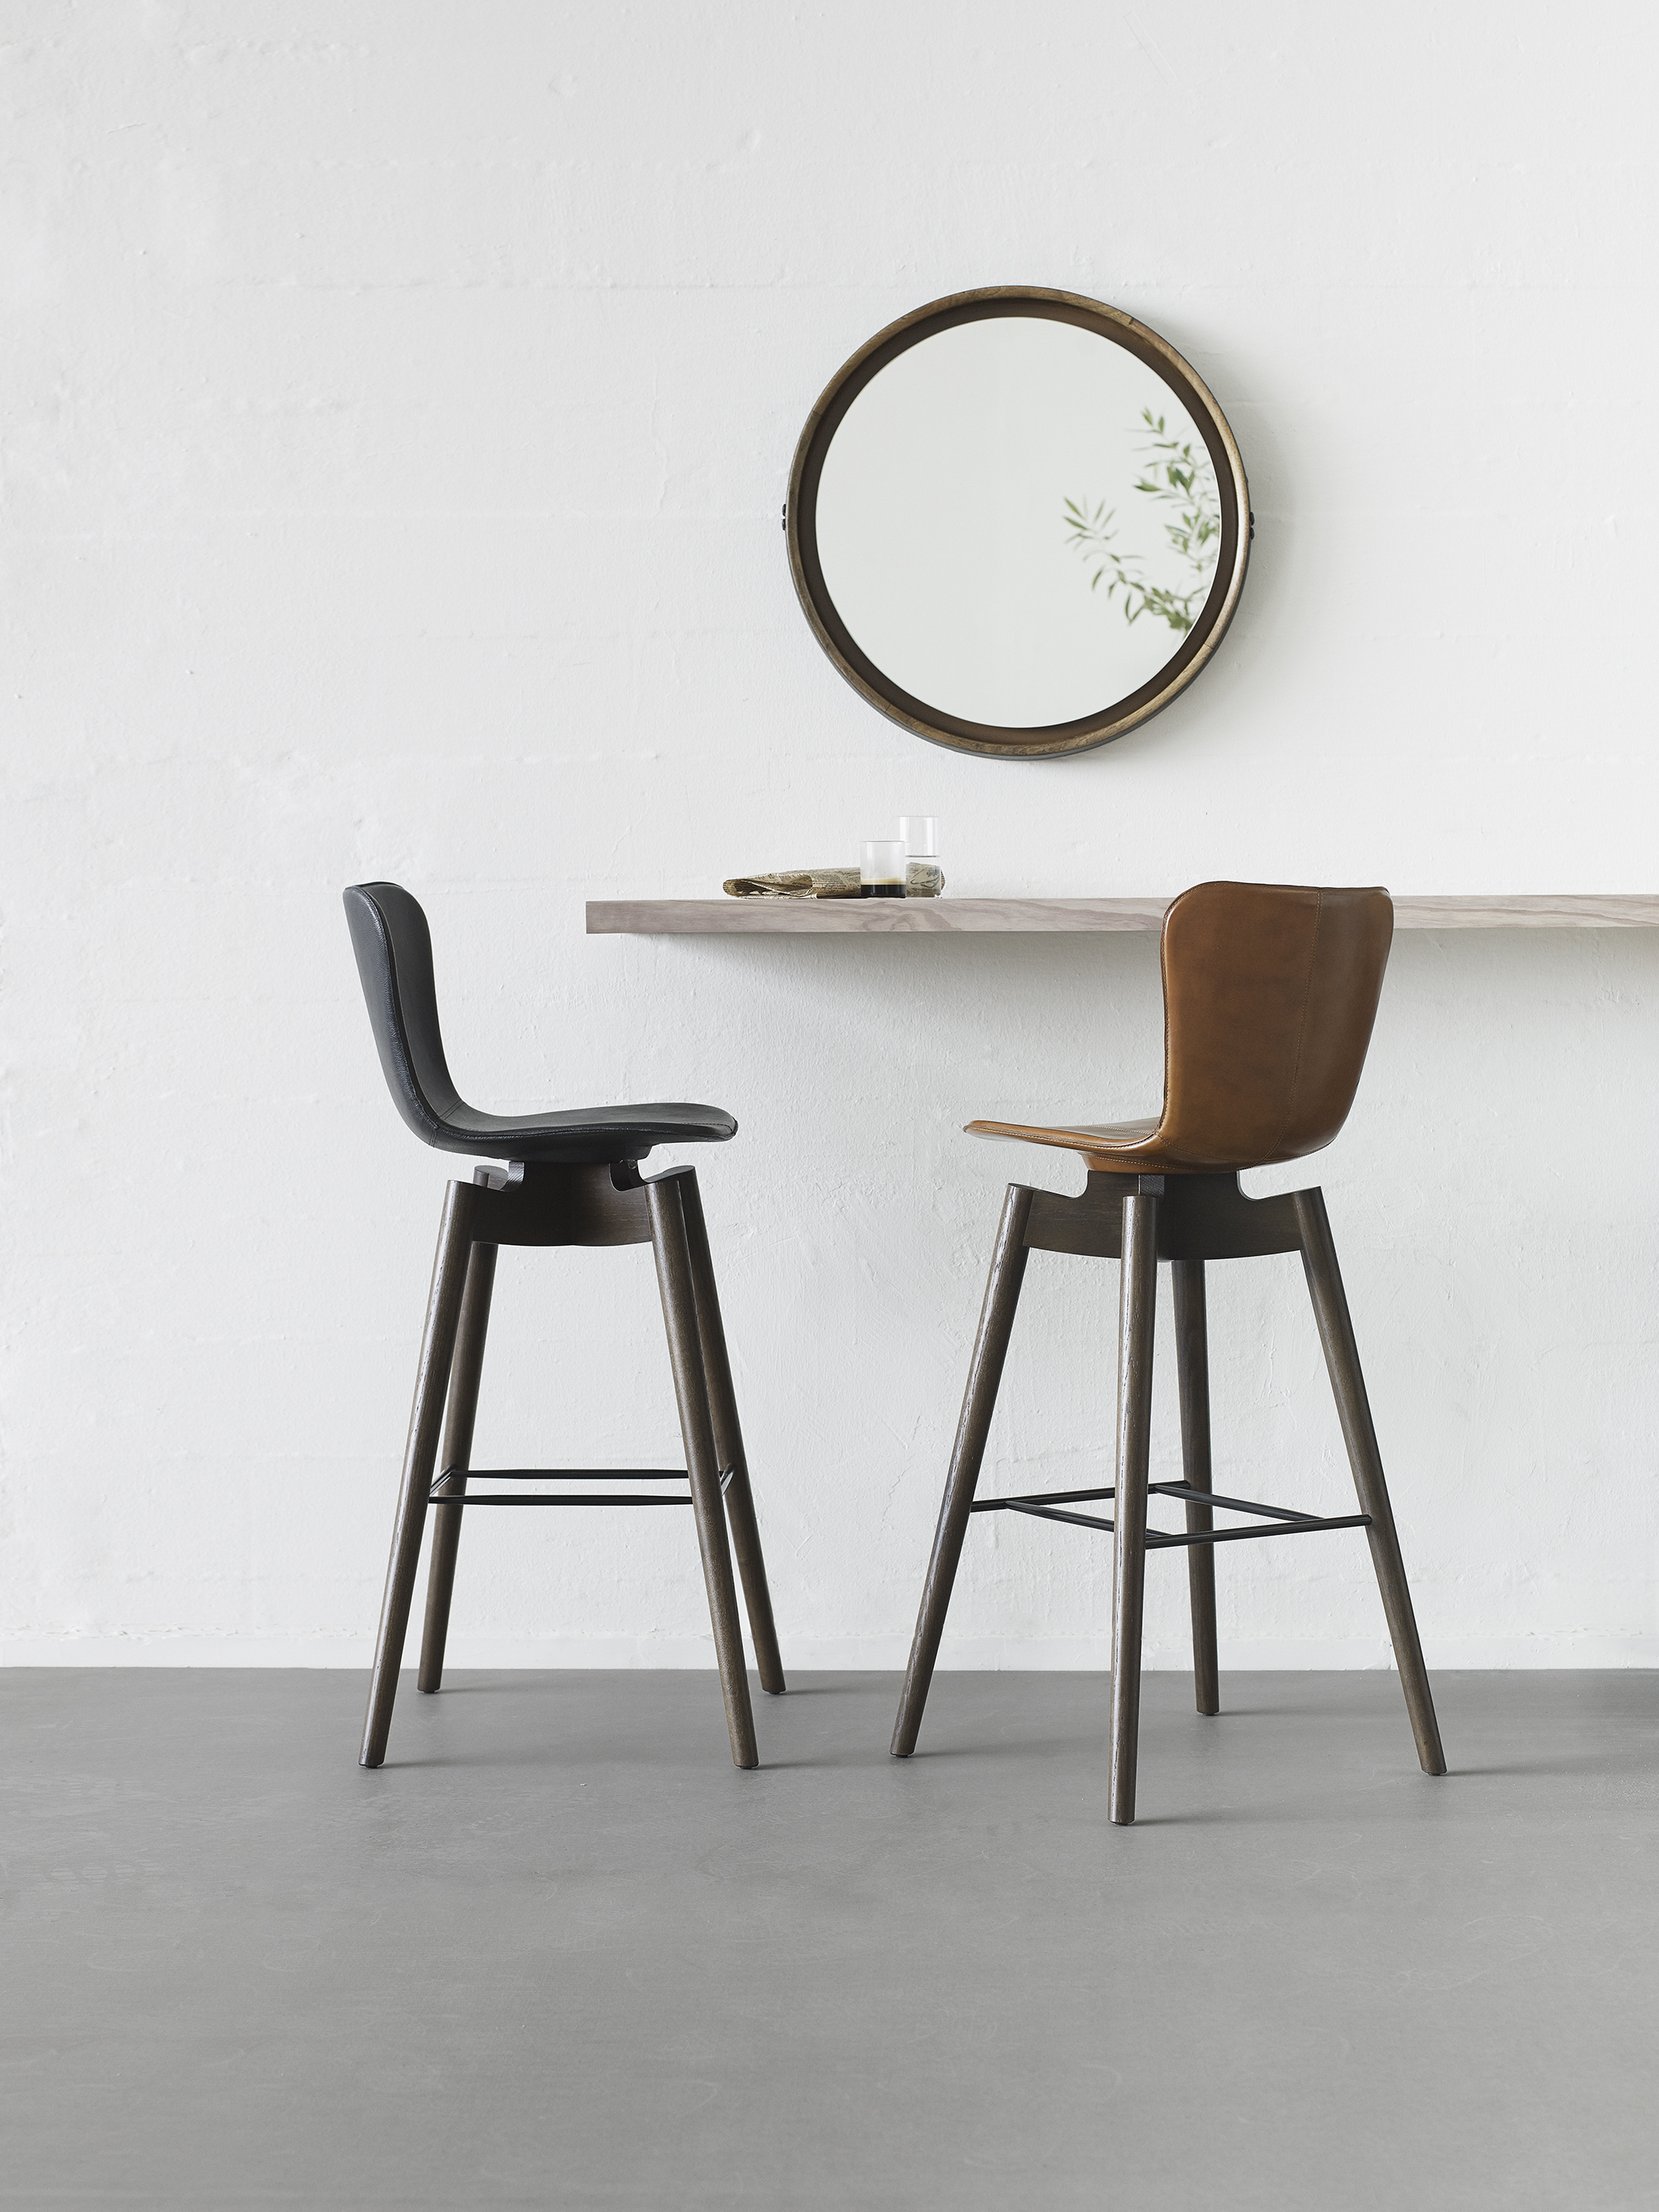 Mater Design Shell Lounge Chair and Shell Barstool from Mater Design